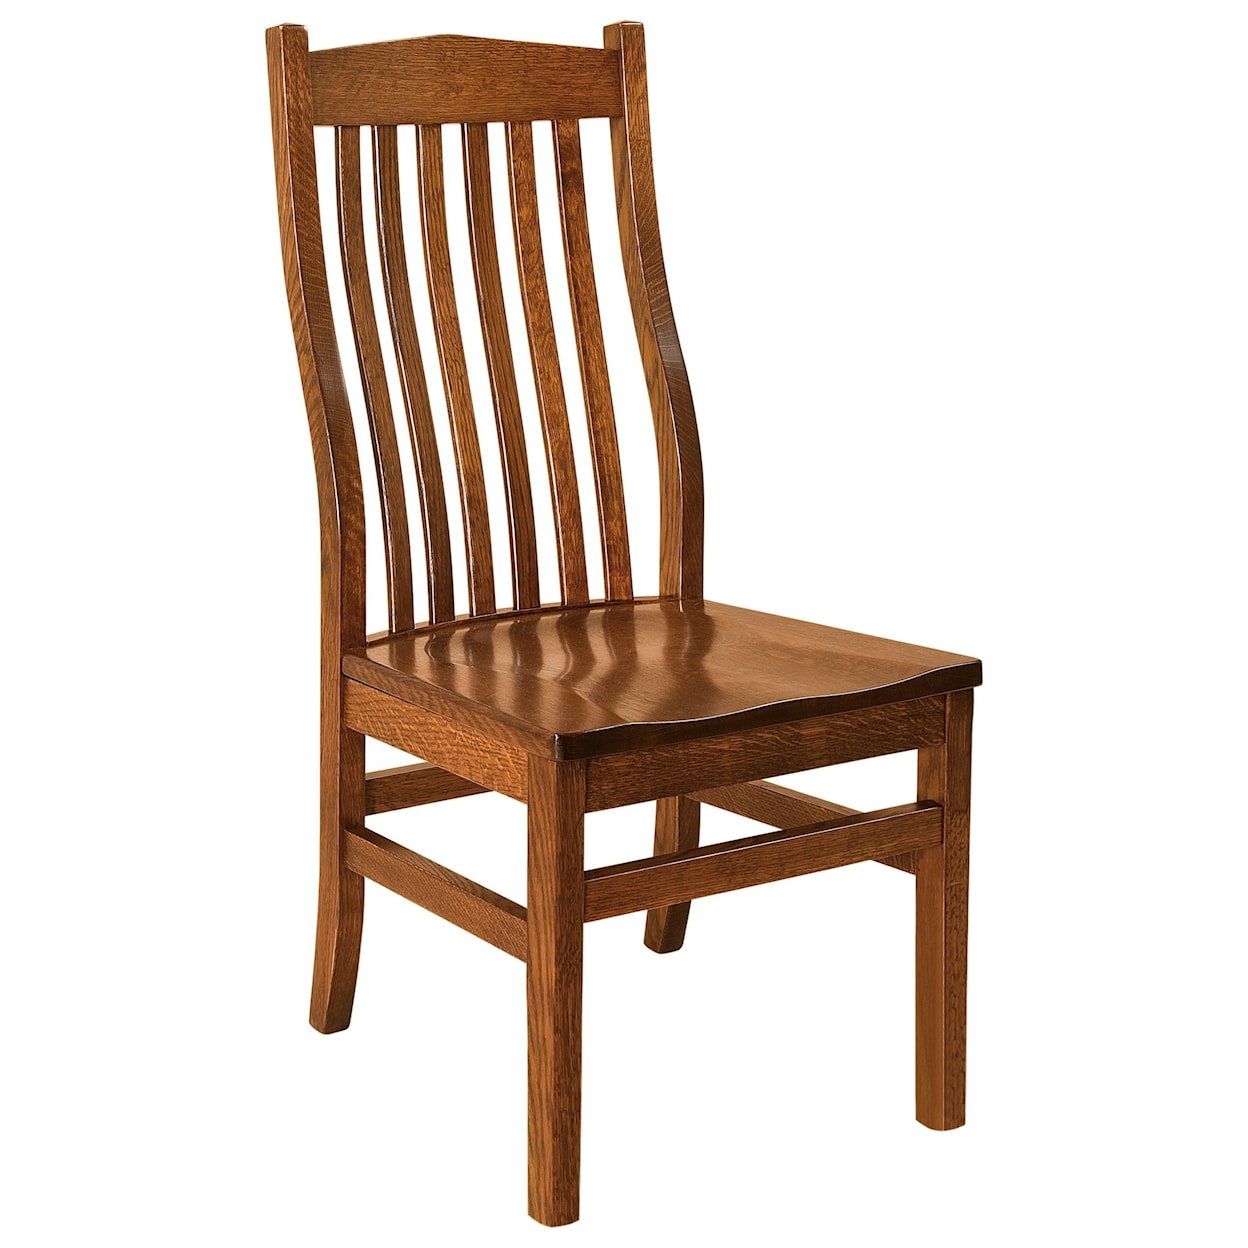 F&N Woodworking Sullivan Side Chair - Fabric Seat